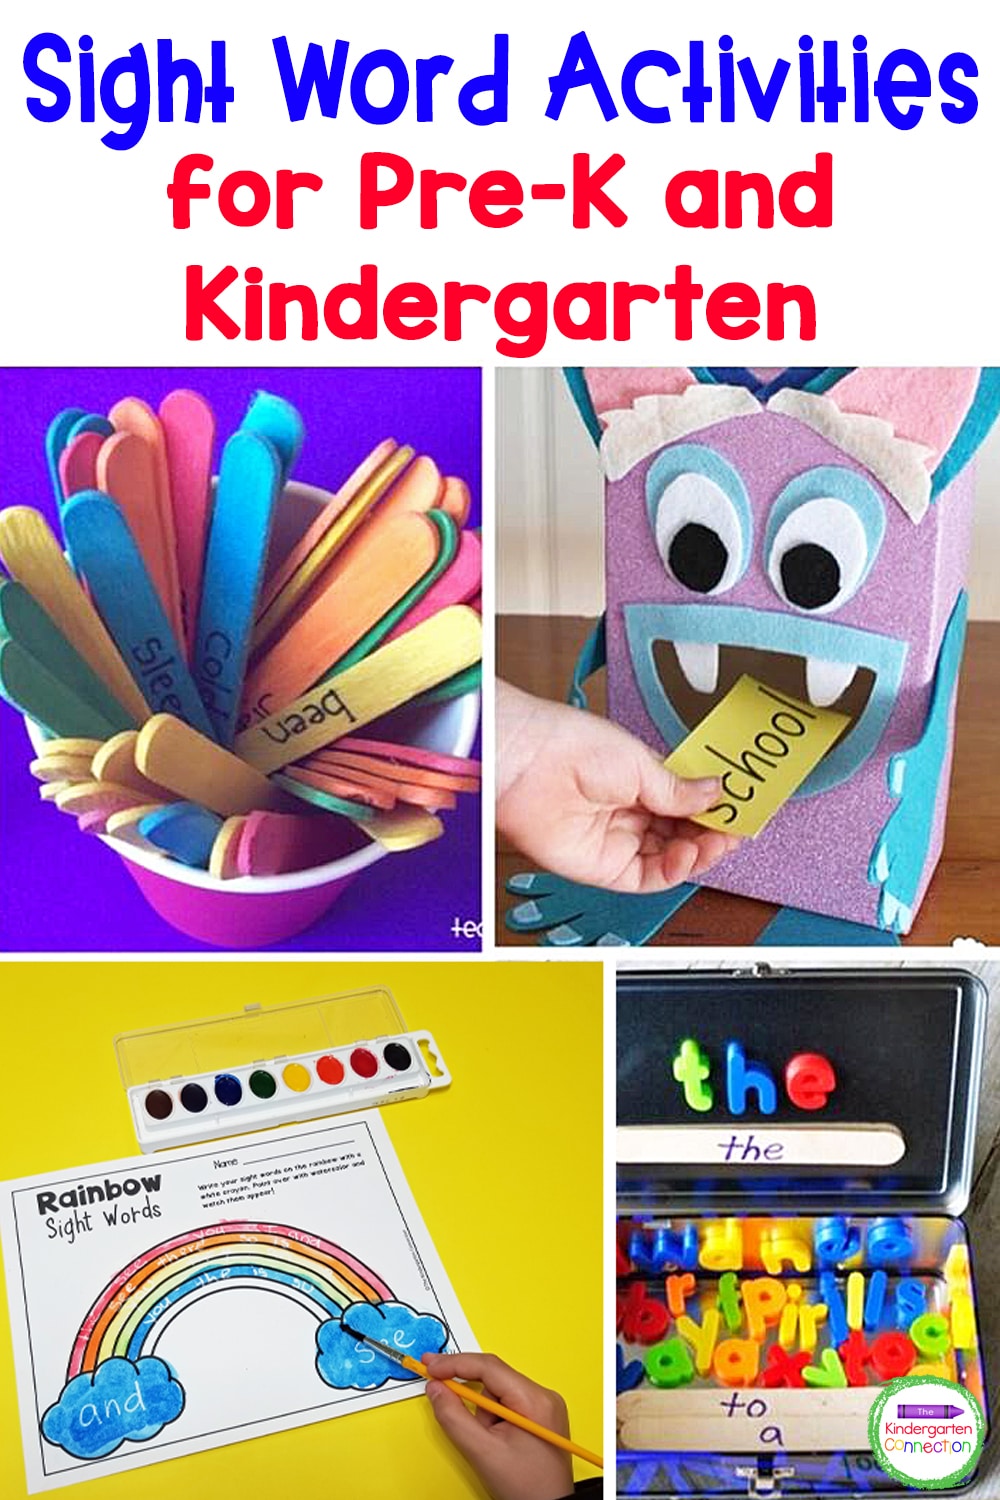 These 27 awesome sight word activities for Pre-K & Kindergarten provide fun, hands-on ways to build sight word knowledge and reading skills!